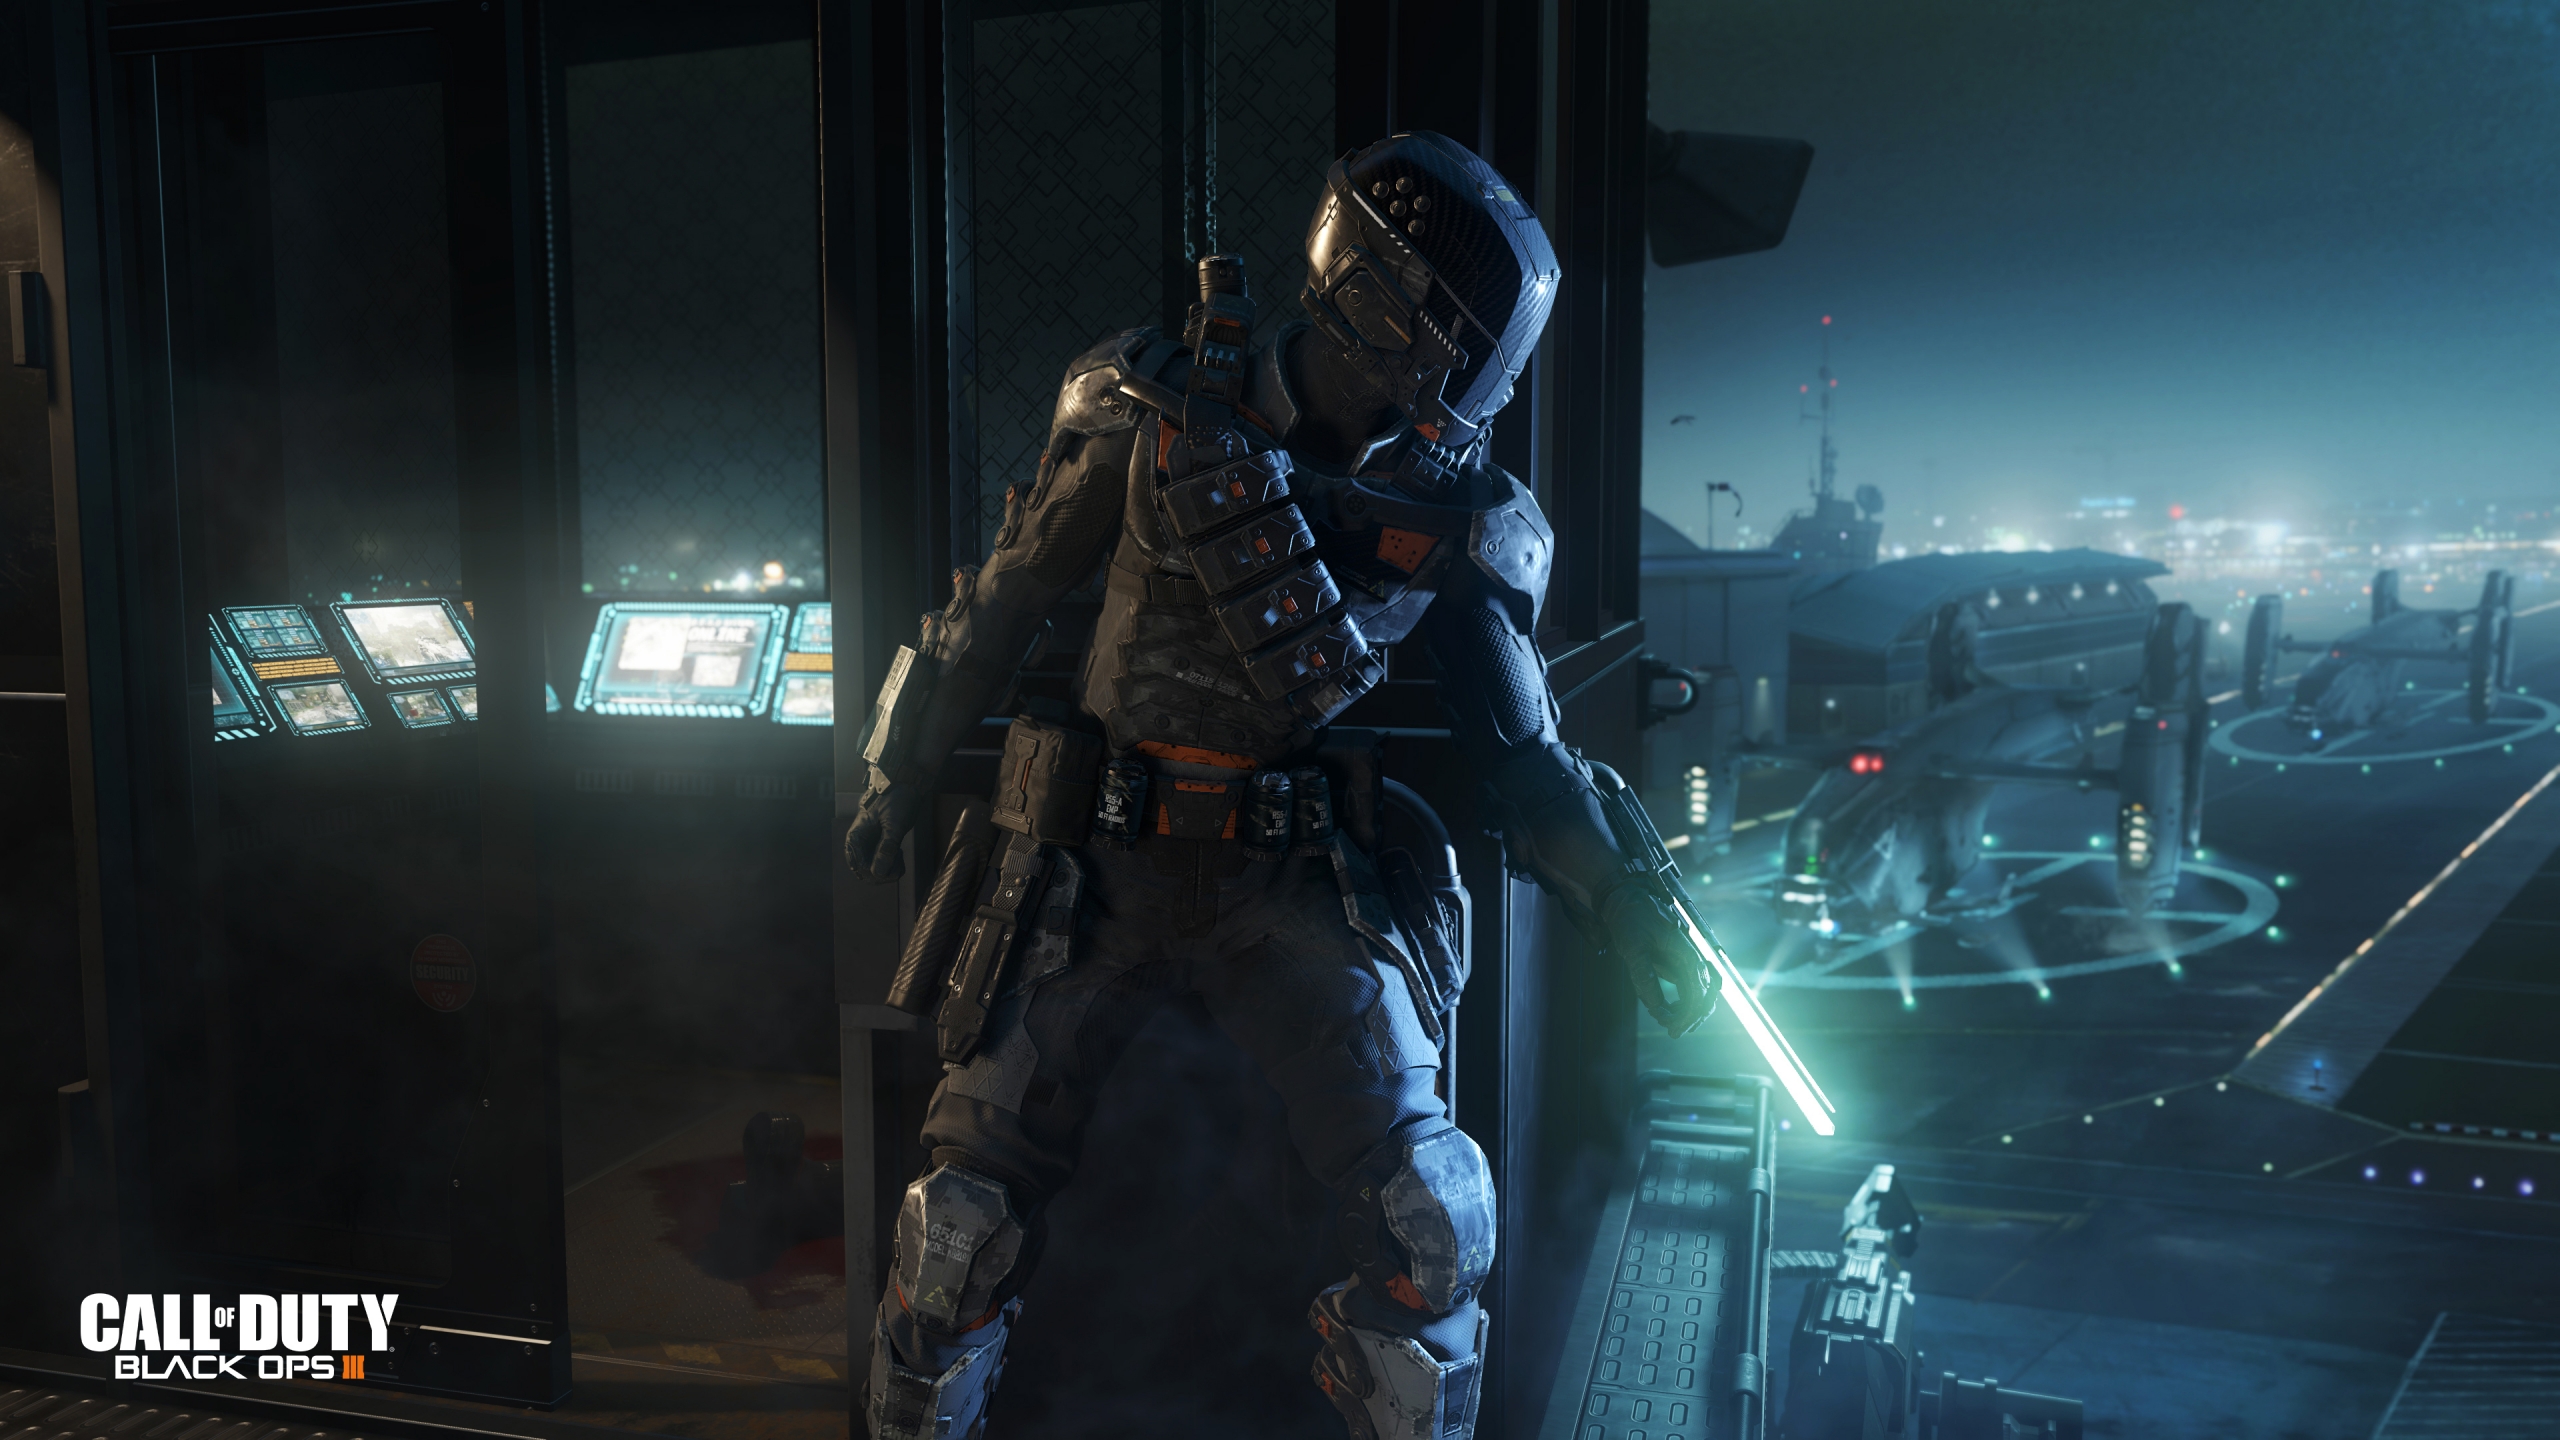 Call of Duty Black Ops 3 Specialist Spectre for 2560x1440 HDTV resolution